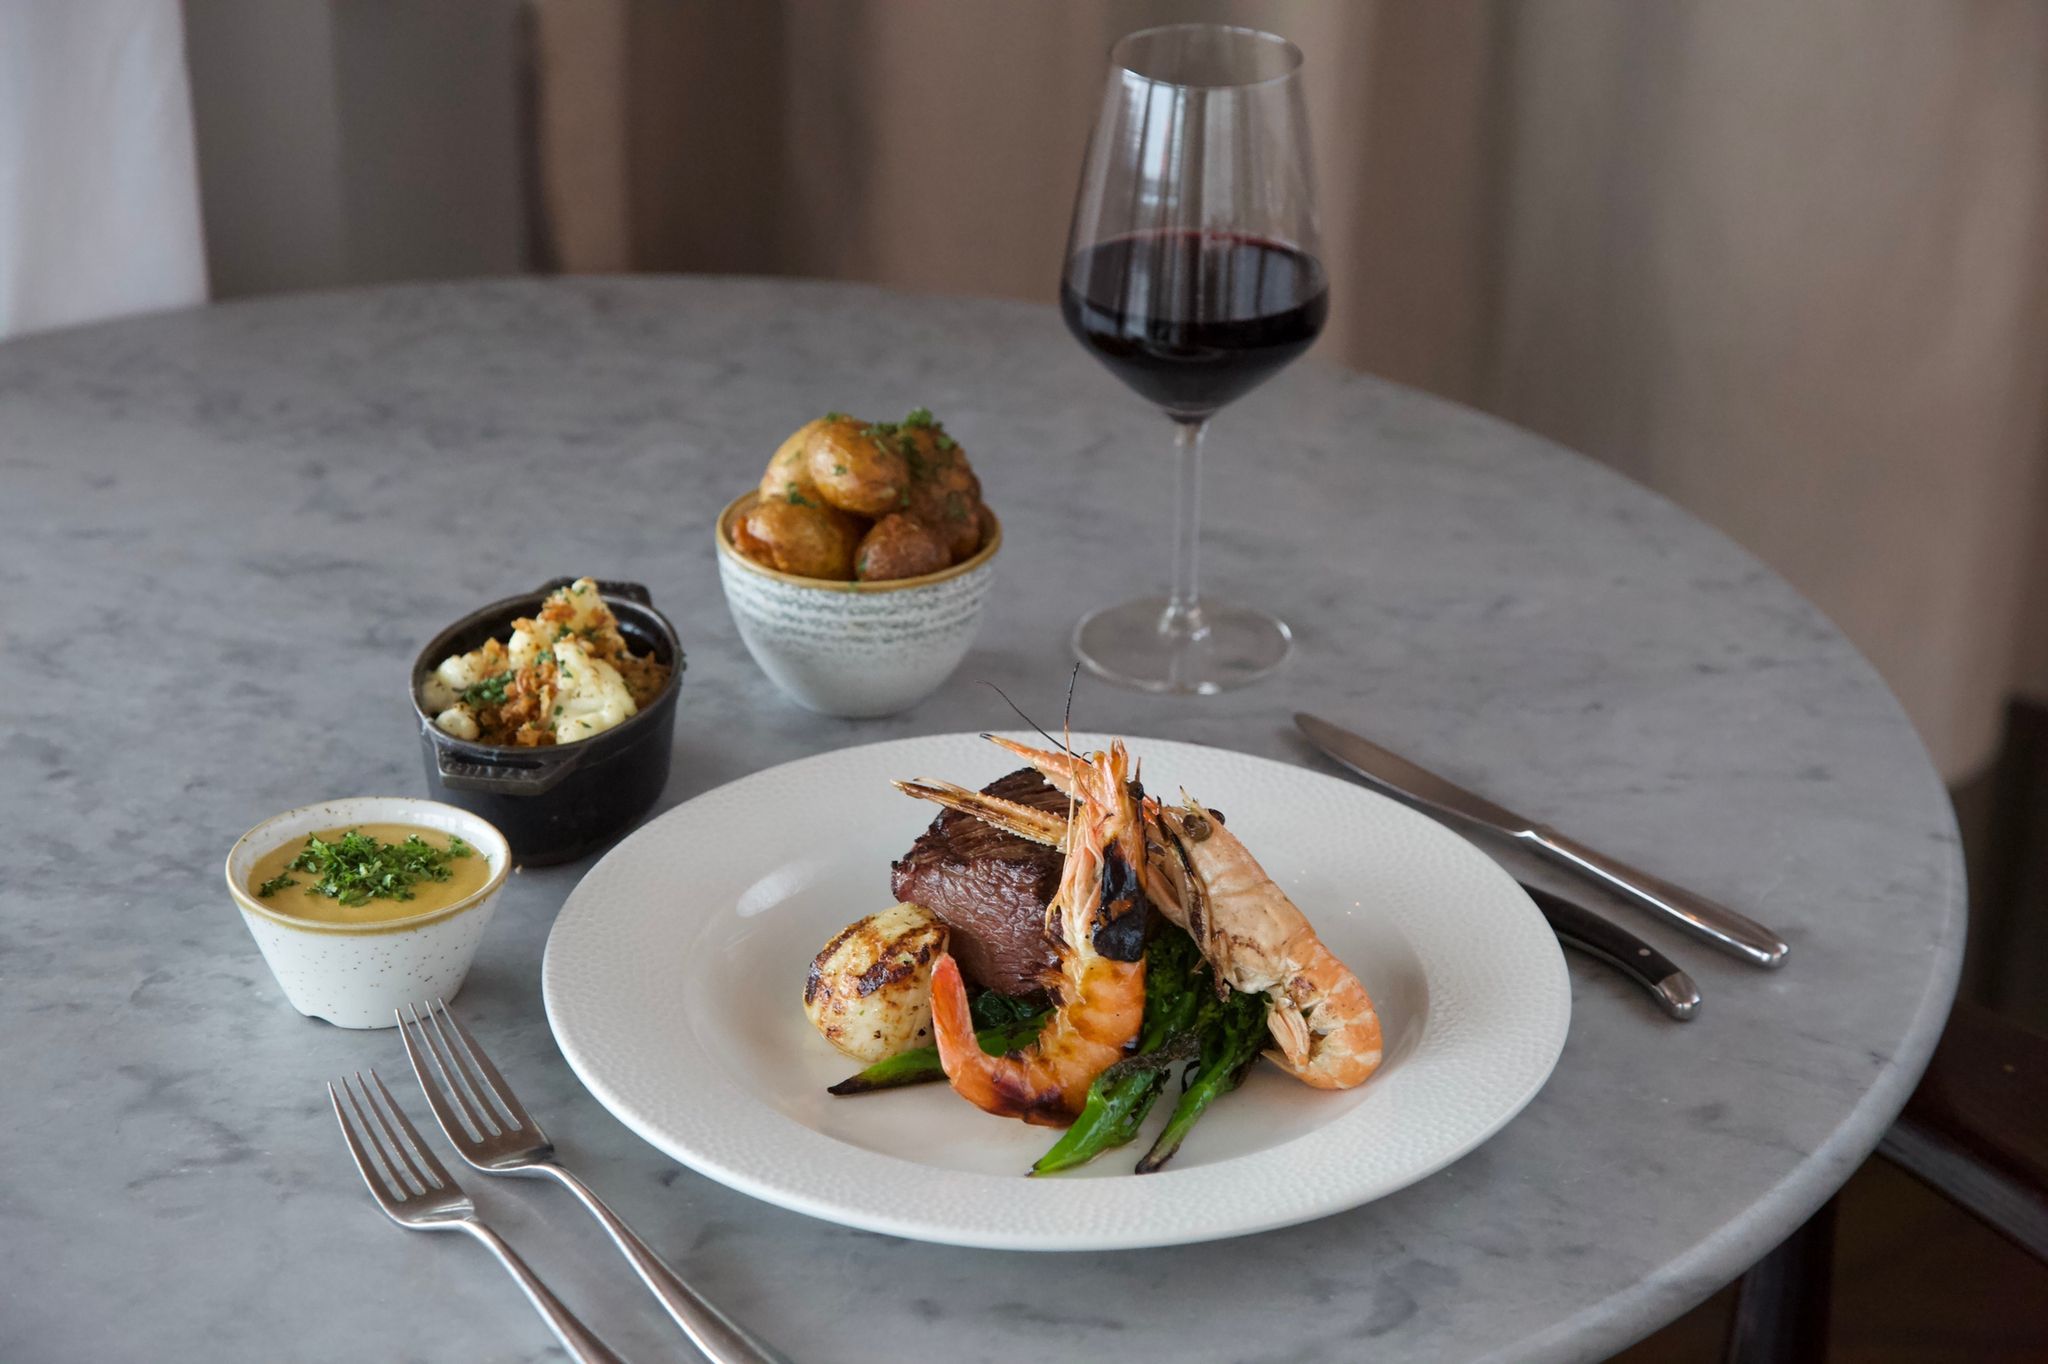 Chateaubriand, Scallop, Grilled King Prawn and Langoustine, Burnt Butter Bearnaise, Truffle Cauliflower Cheese and Crispy Garlic Potatoes served on grey table and with glass of red wine, all part of the Surf N' Turf offer